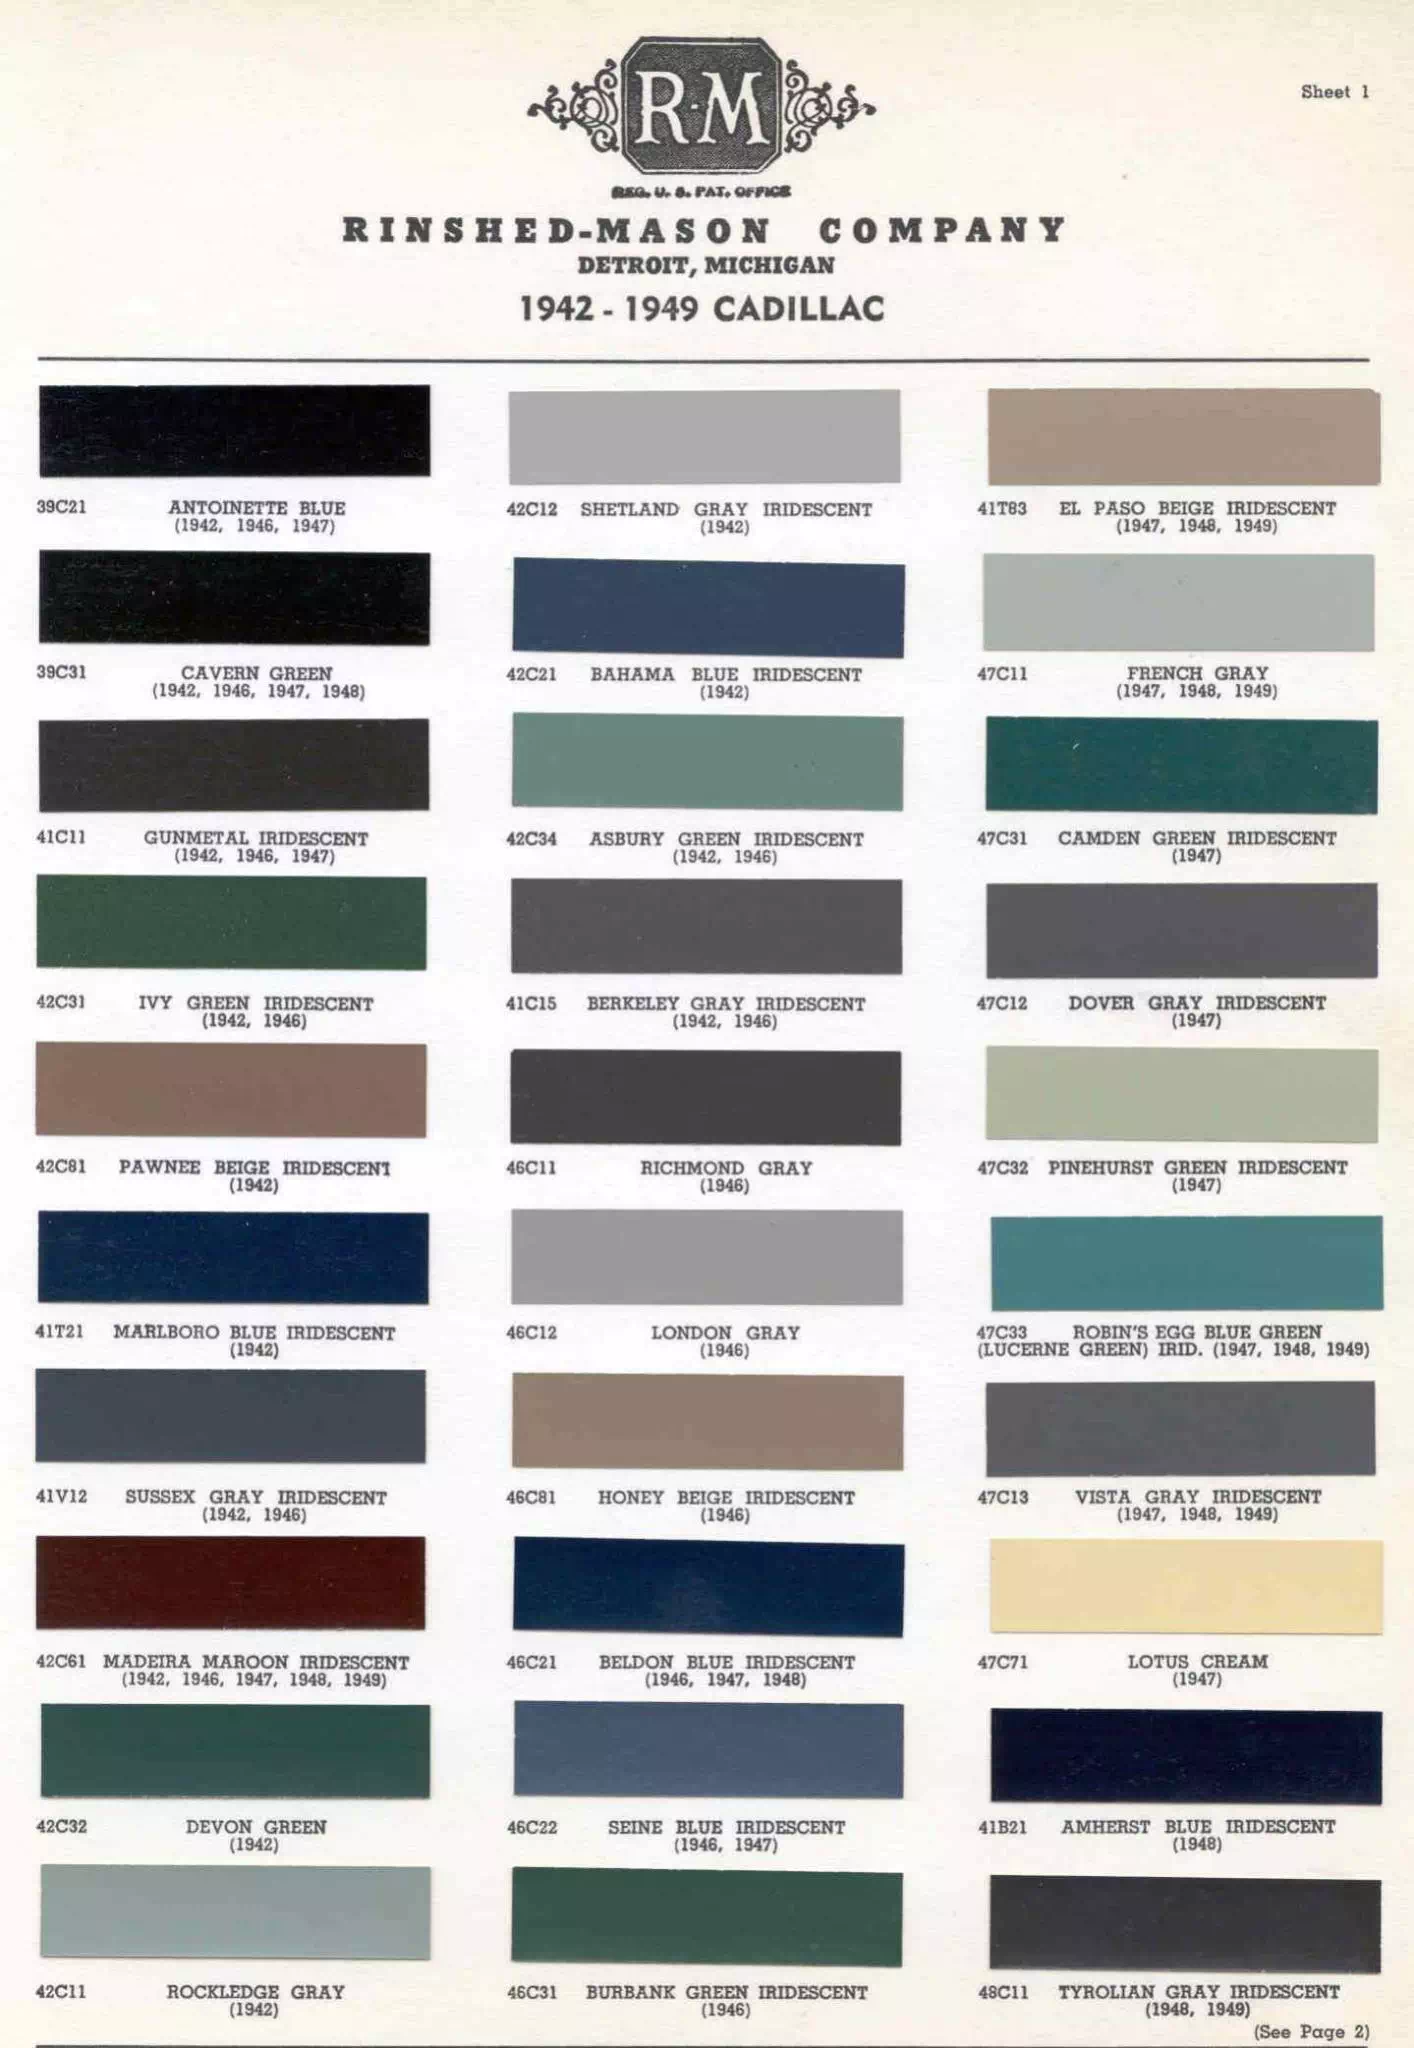 Color Examples and their codes for Cadillac Vehicles